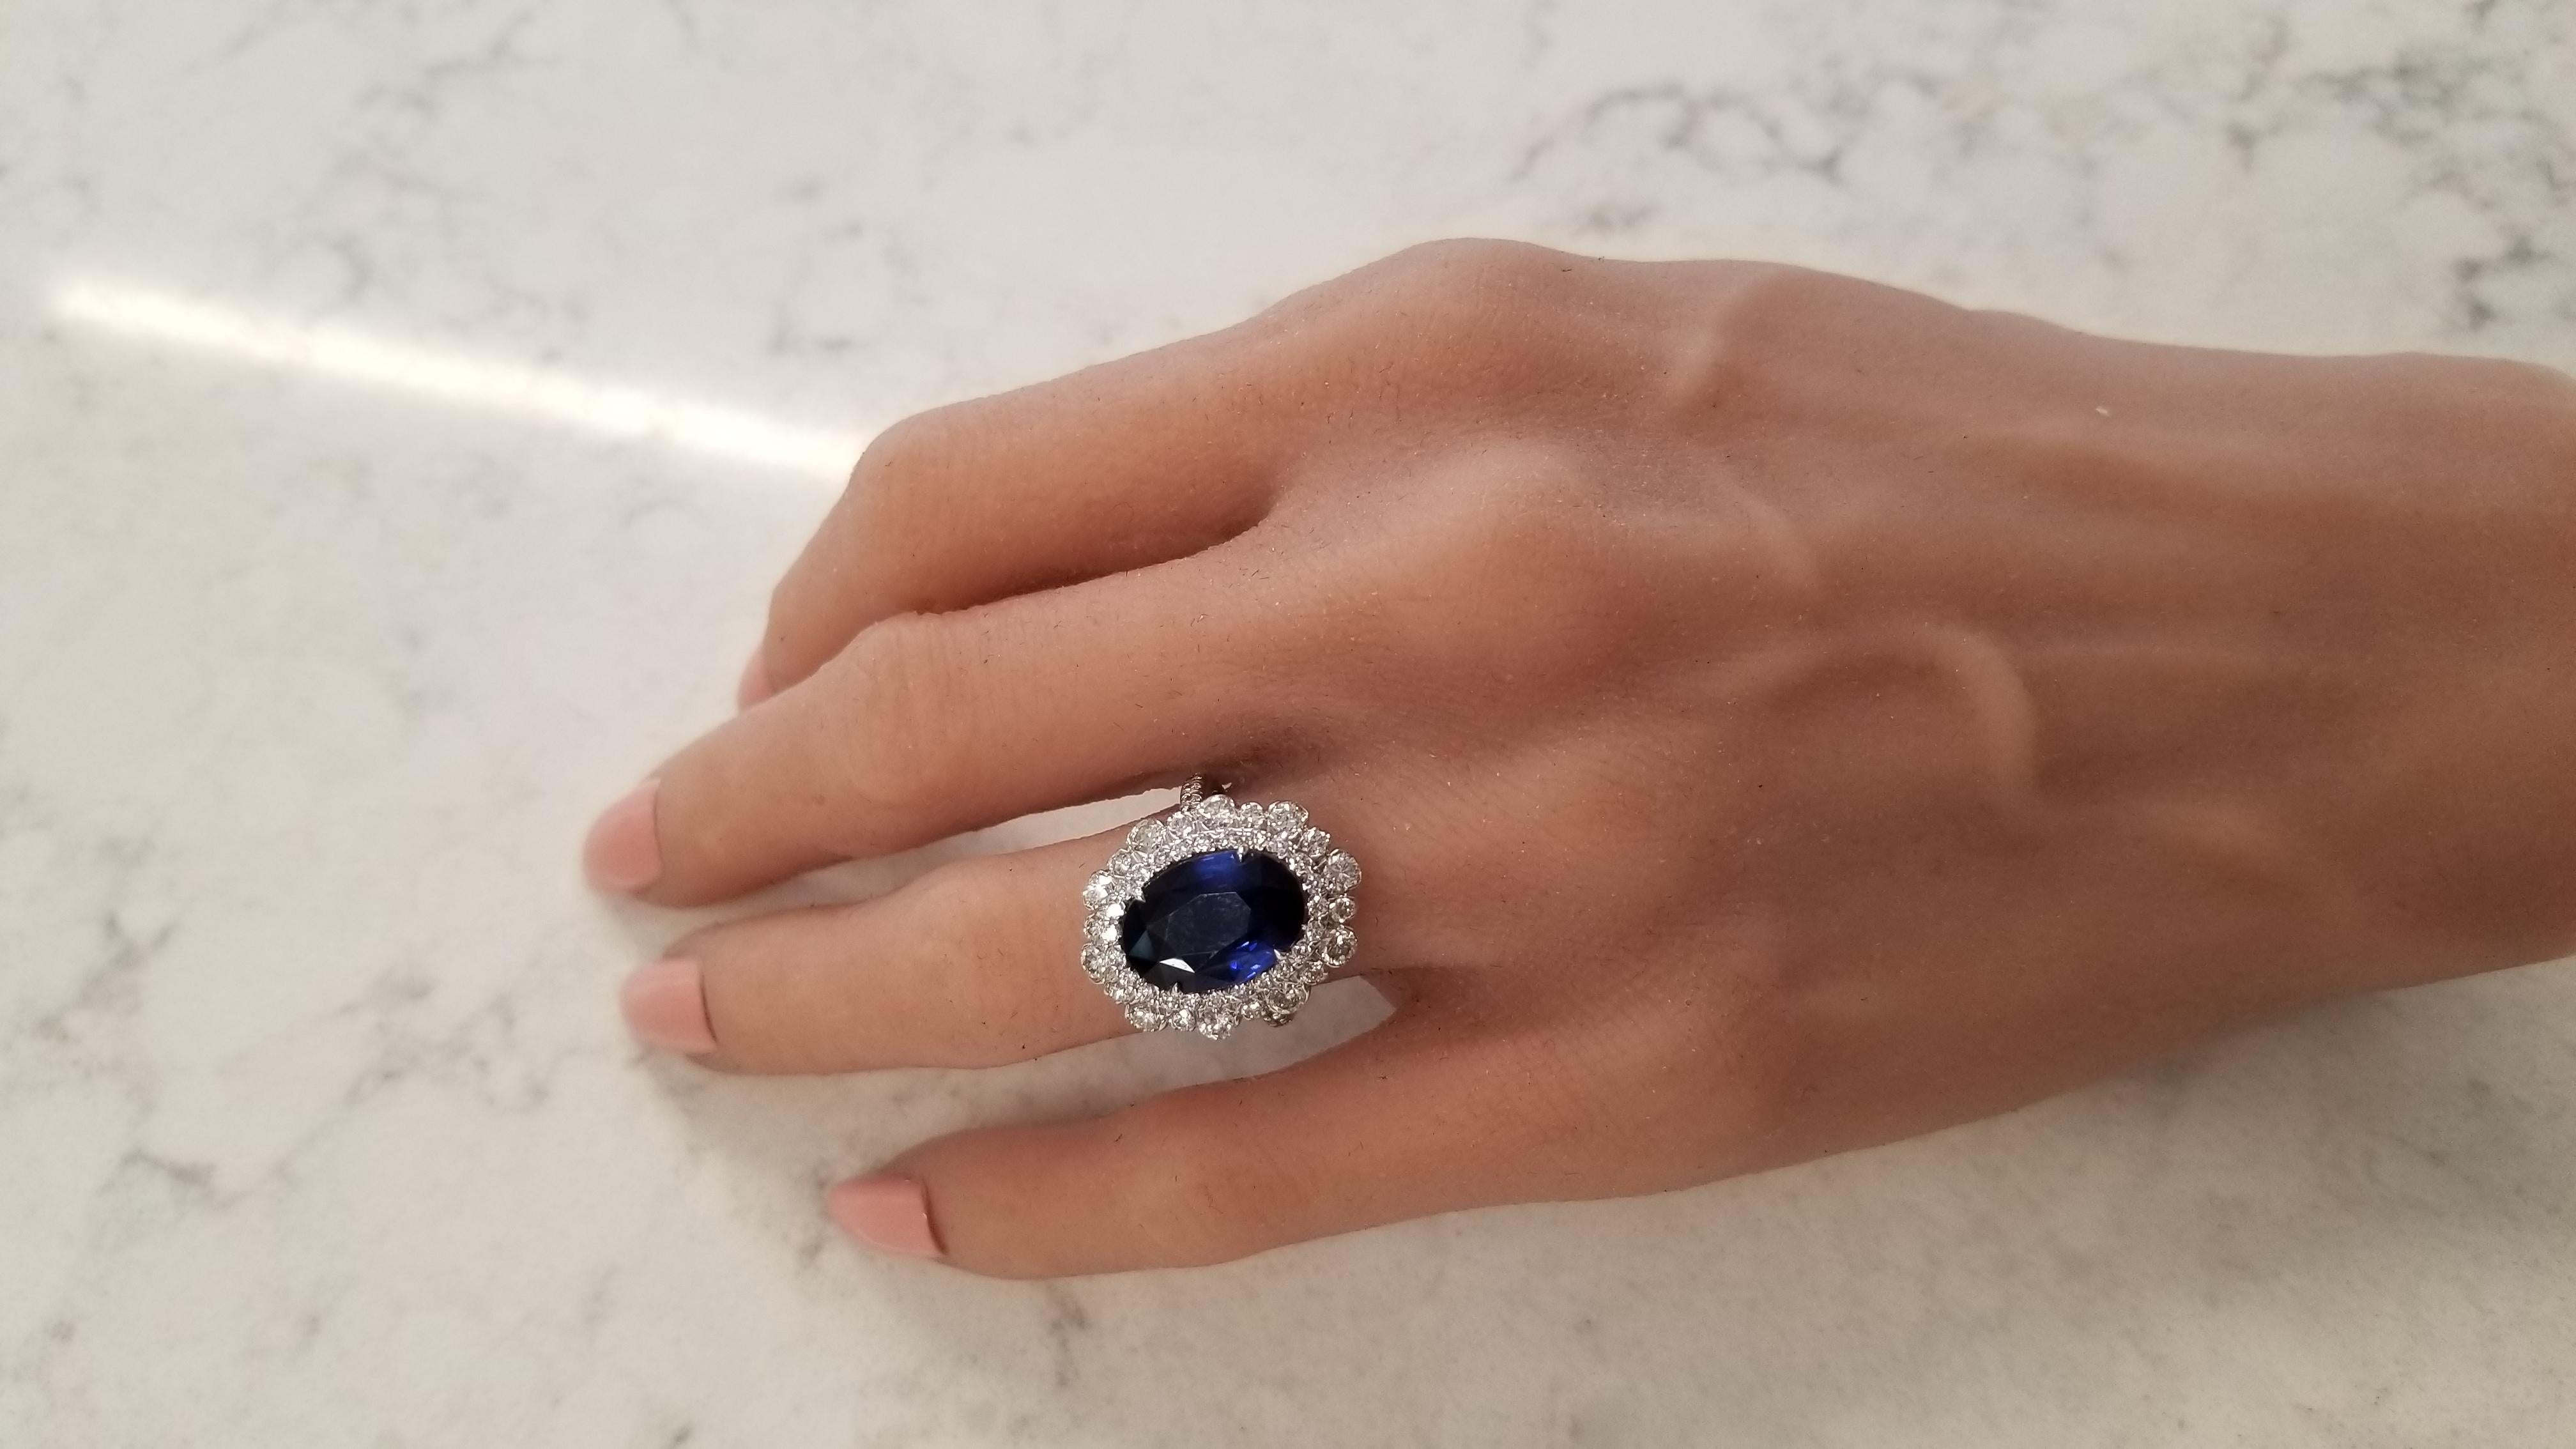 Women's 7.06 Carat Oval Blue Sapphire and Diamond Cocktail Ring in 18 Karat White Gold